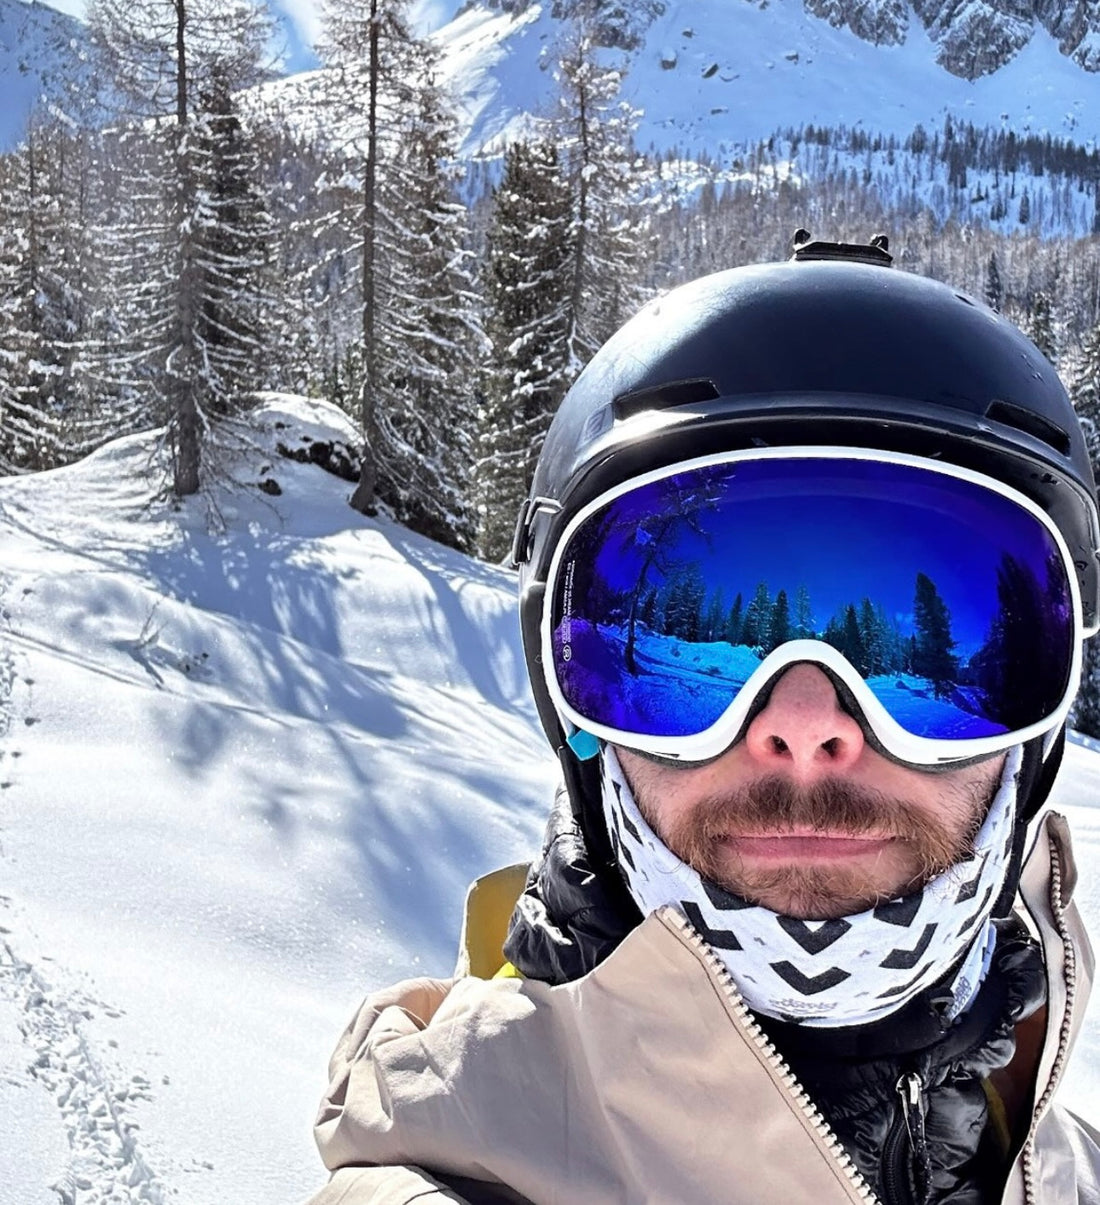 The mountains have a new queen: GOGGLE MASK by Alba Optics.